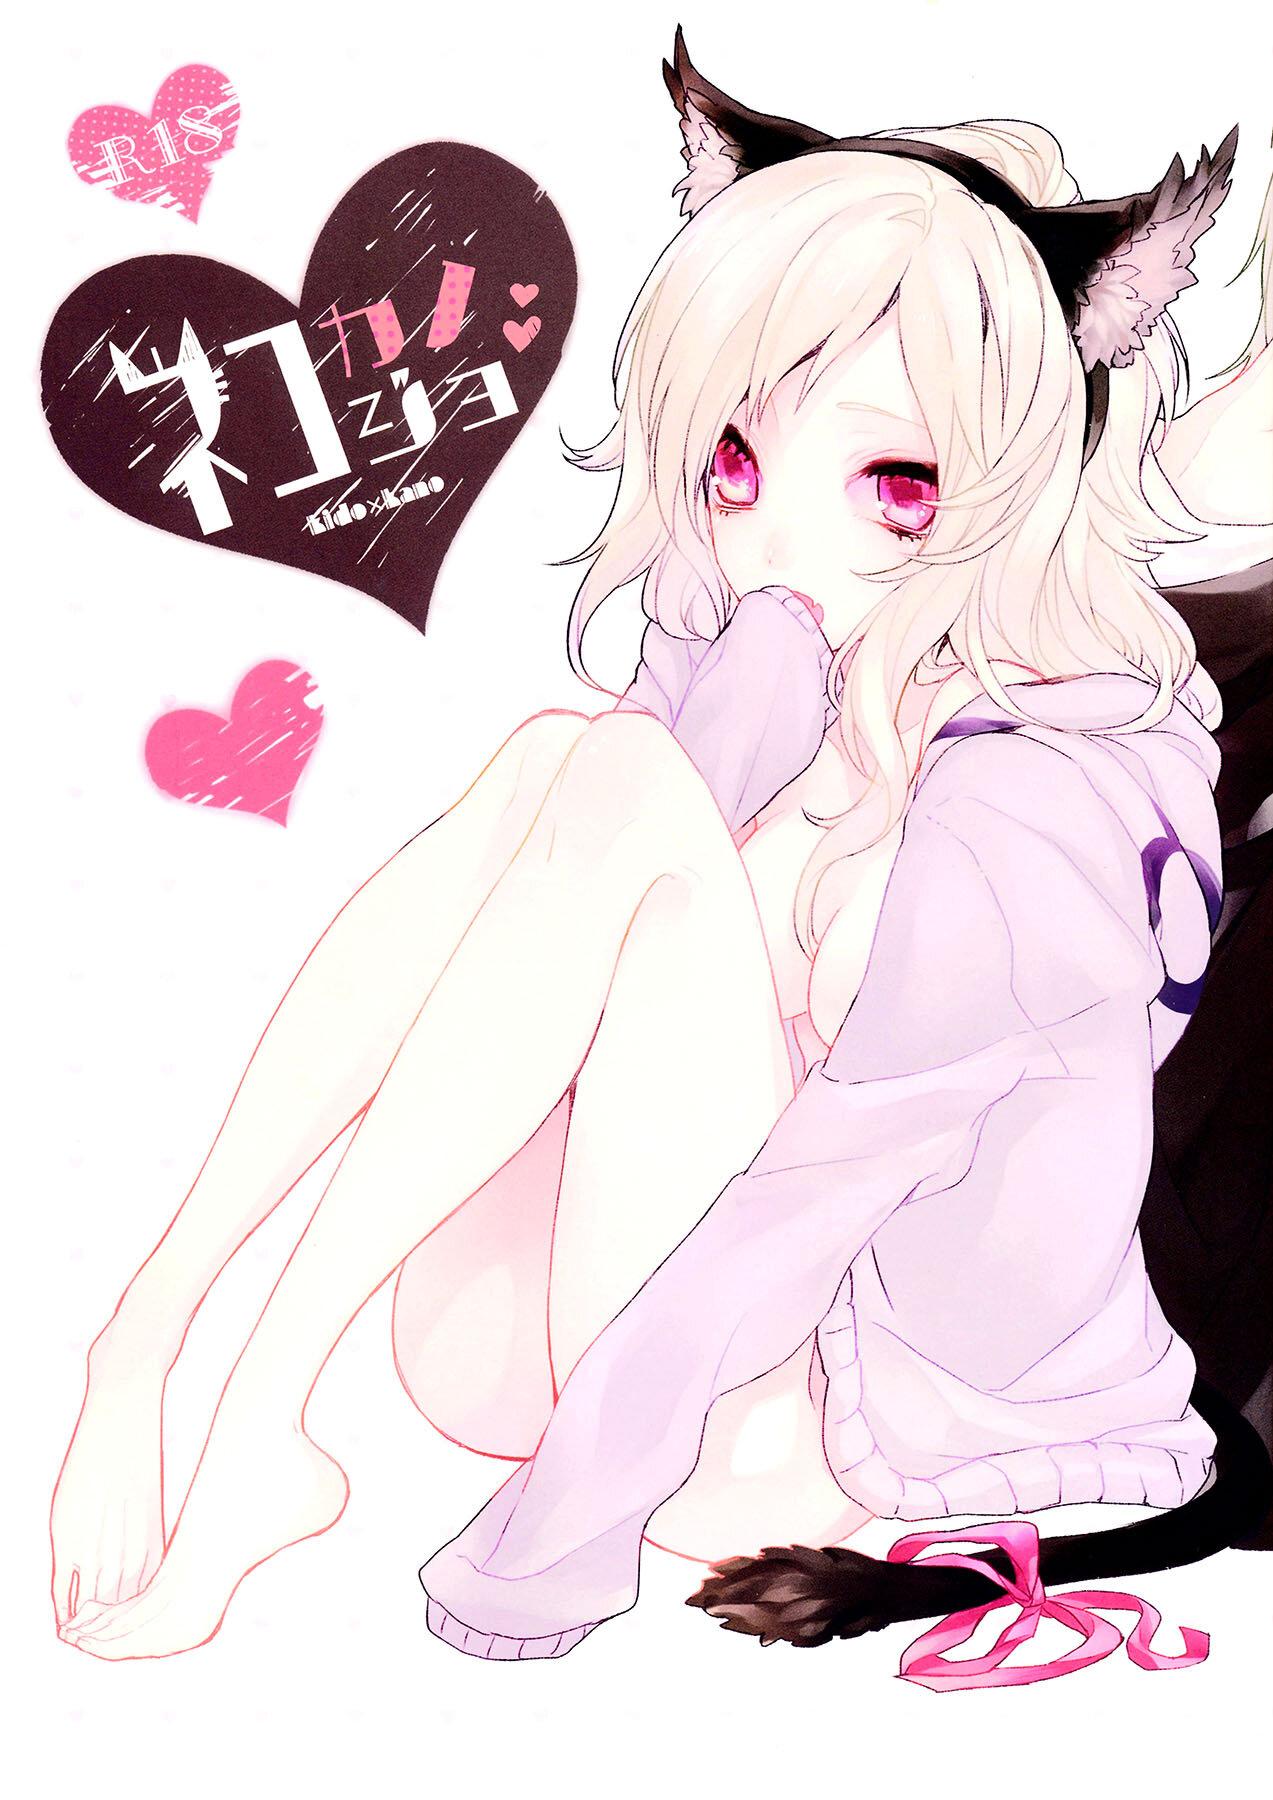 Hot Women Having Sex Neko Kanojo - Kagerou project First Time - Picture 1